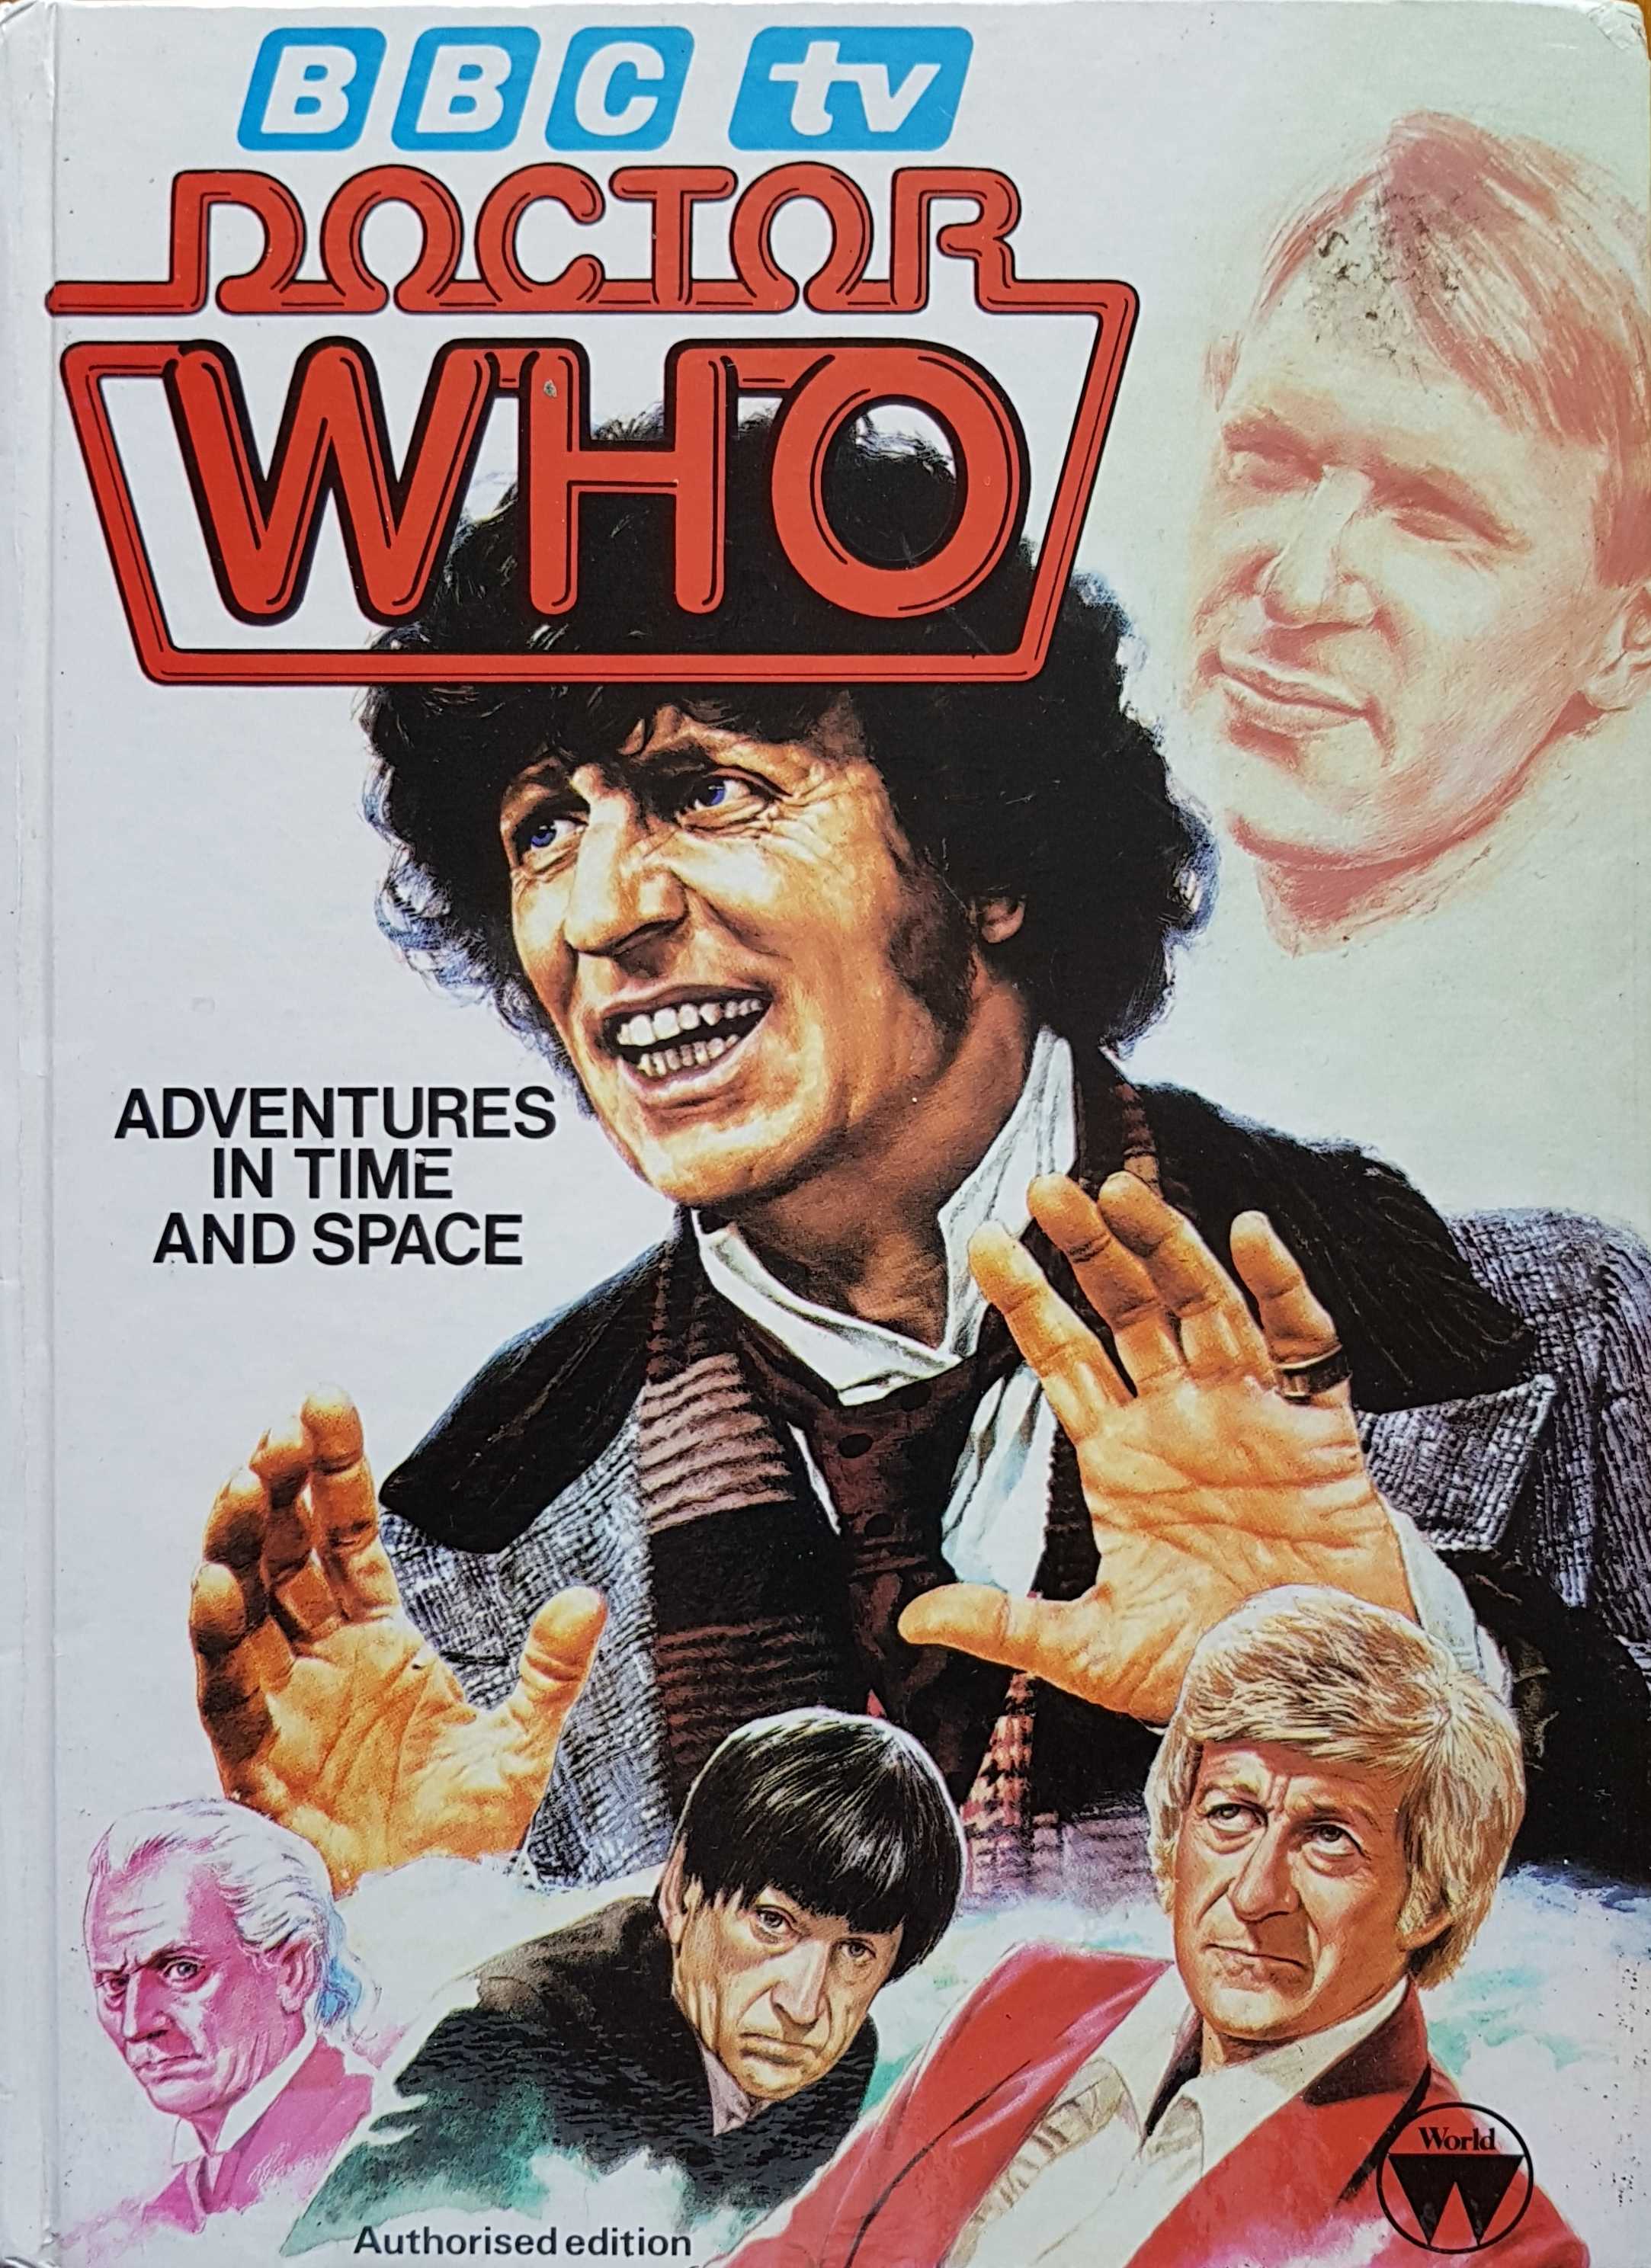 Picture of Doctor Who - Adventures in time and space by artist Various from the BBC books - Records and Tapes library